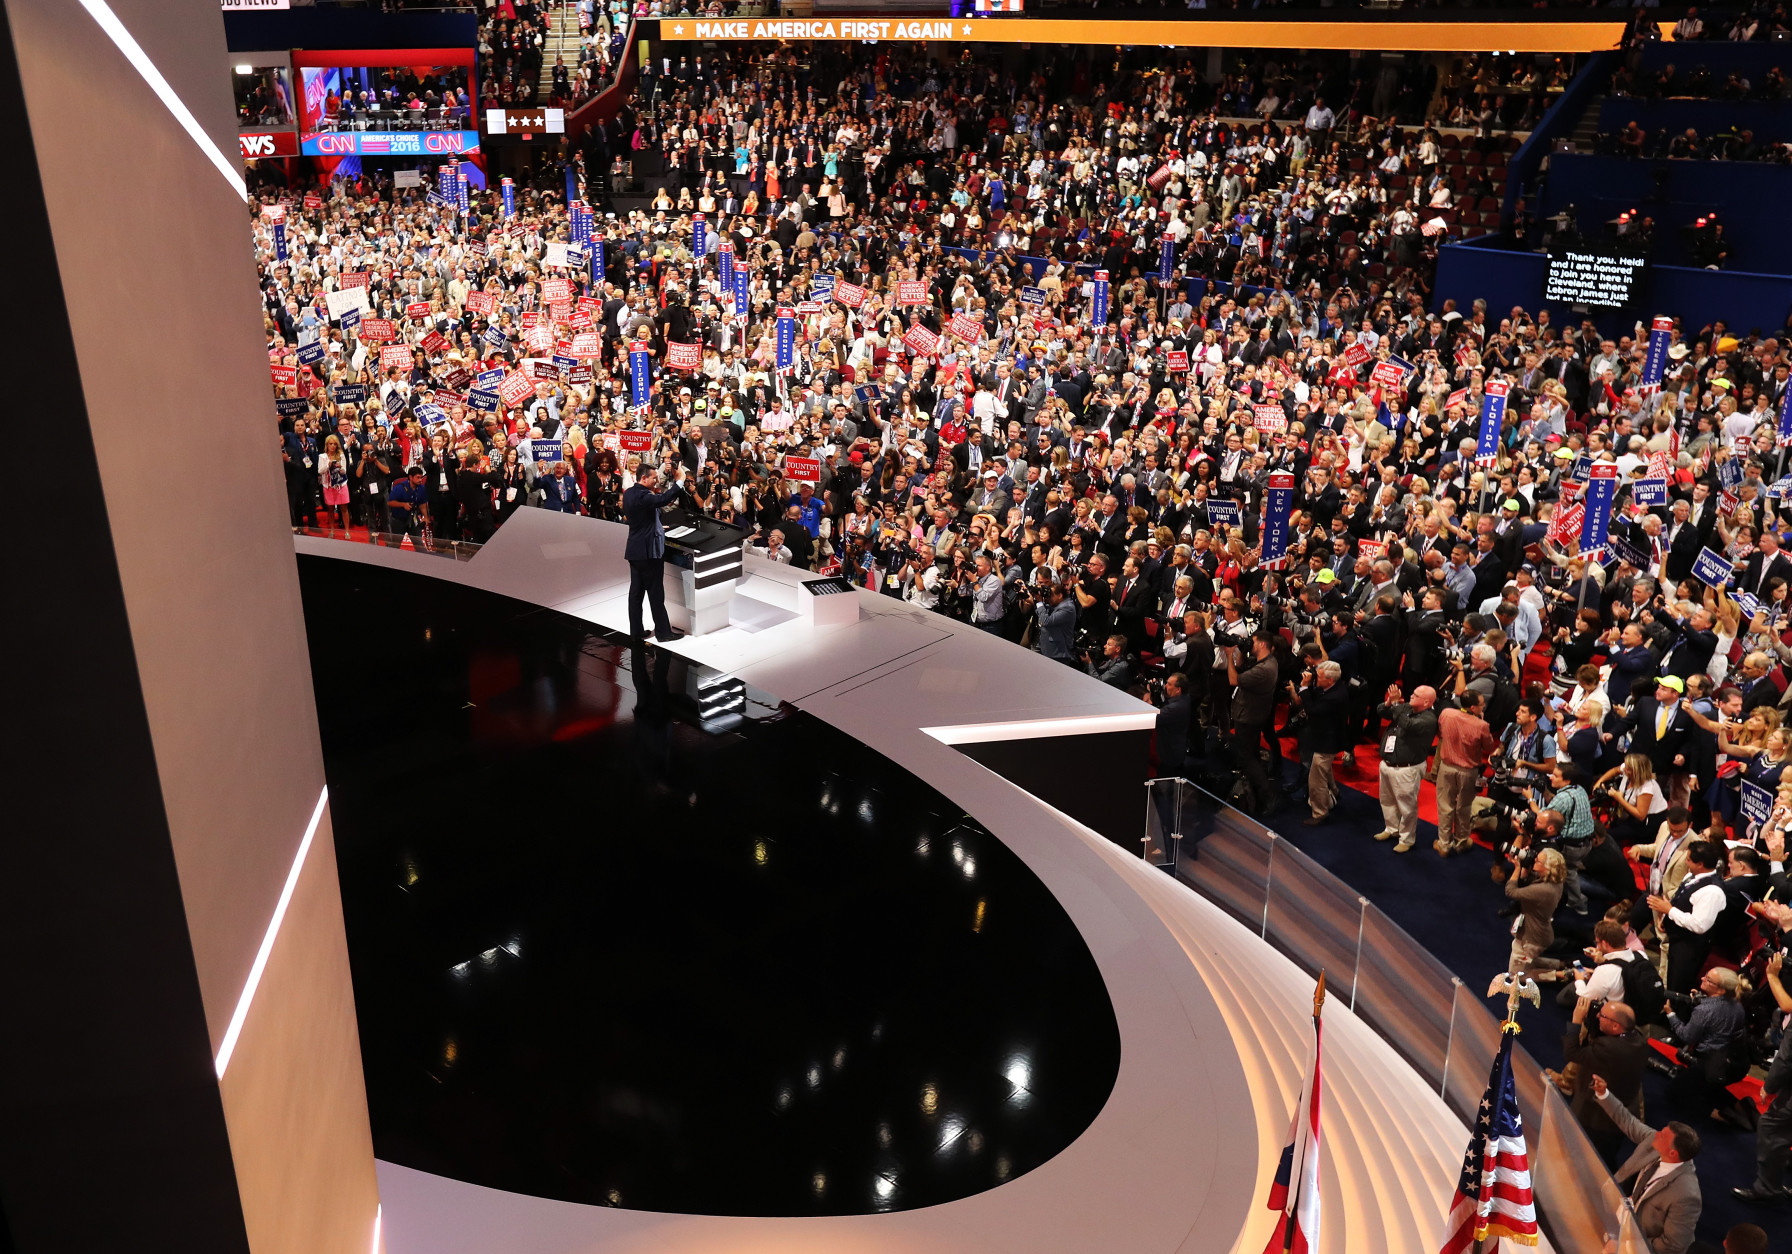 CLEVELAND, OH - JULY 20:  Sen. Ted Cruz (R-TX) waves to the crowd as he walks on stage to deliver a speech on the third day of the Republican National Convention on July 20, 2016 at the Quicken Loans Arena in Cleveland, Ohio. Republican presidential candidate Donald Trump received the number of votes needed to secure the party's nomination. An estimated 50,000 people are expected in Cleveland, including hundreds of protesters and members of the media. The four-day Republican National Convention kicked off on July 18.  (Photo by Chip Somodevilla/Getty Images)